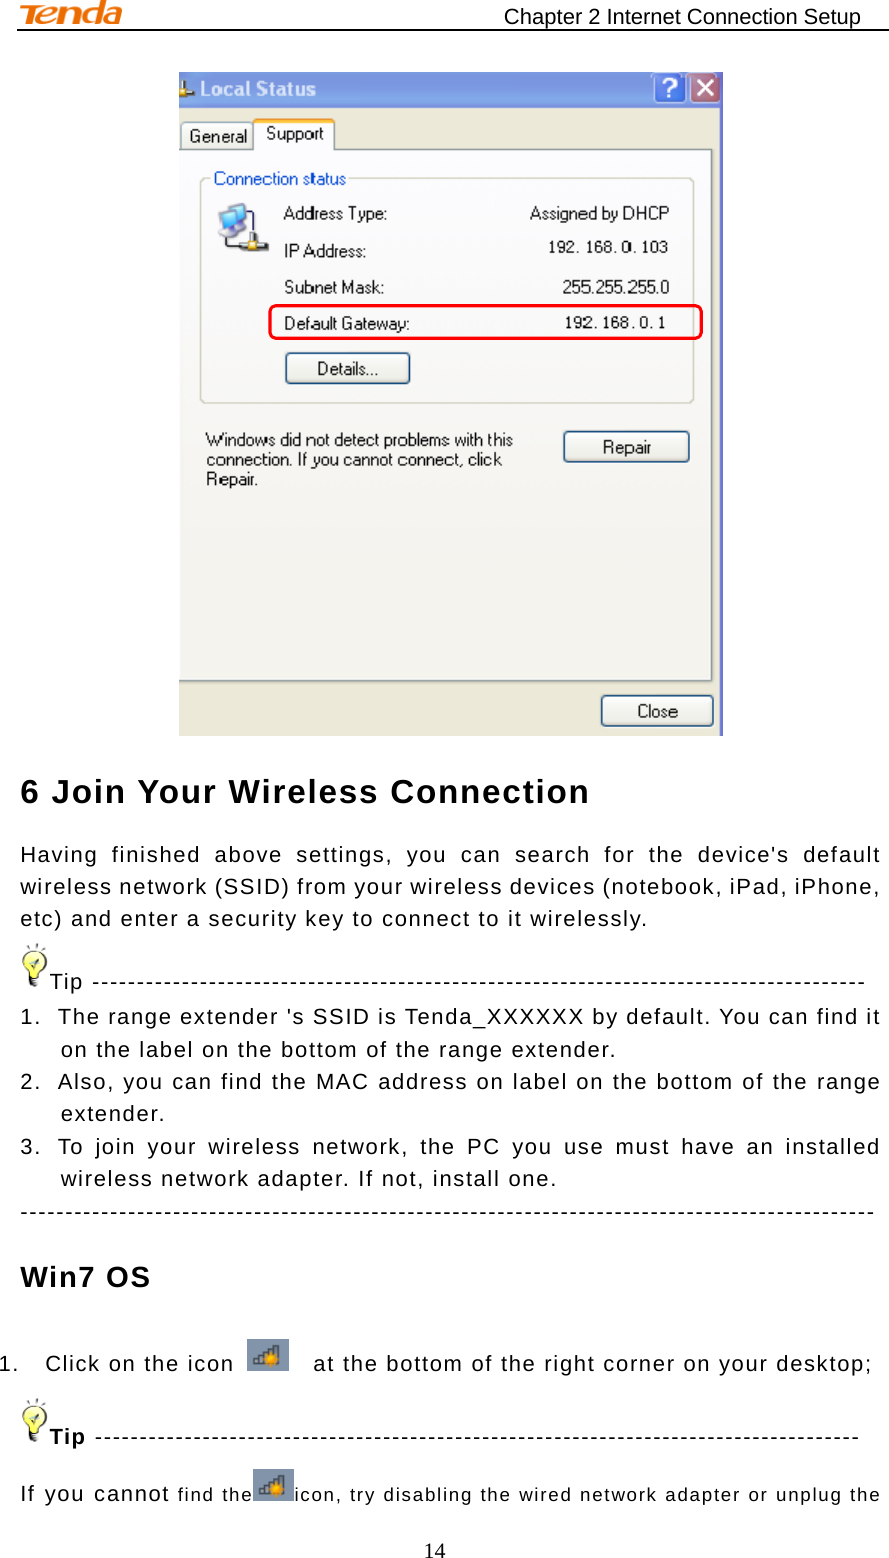                                    Chapter 2 Internet Connection Setup 14  6 Join Your Wireless Connection Having finished above settings, you can search for the device&apos;s default wireless network (SSID) from your wireless devices (notebook, iPad, iPhone, etc) and enter a security key to connect to it wirelessly. Tip -------------------------------------------------------------------------------------- 1. The range extender &apos;s SSID is Tenda_XXXXXX by default. You can find it on the label on the bottom of the range extender. 2. Also, you can find the MAC address on label on the bottom of the range extender.   3. To join your wireless network, the PC you use must have an installed wireless network adapter. If not, install one. ----------------------------------------------------------------------------------------------- Win7 OS 1. Click on the icon    at the bottom of the right corner on your desktop; Tip ------------------------------------------------------------------------------------- If you cannot find the icon, try disabling the wired network adapter or unplug the 